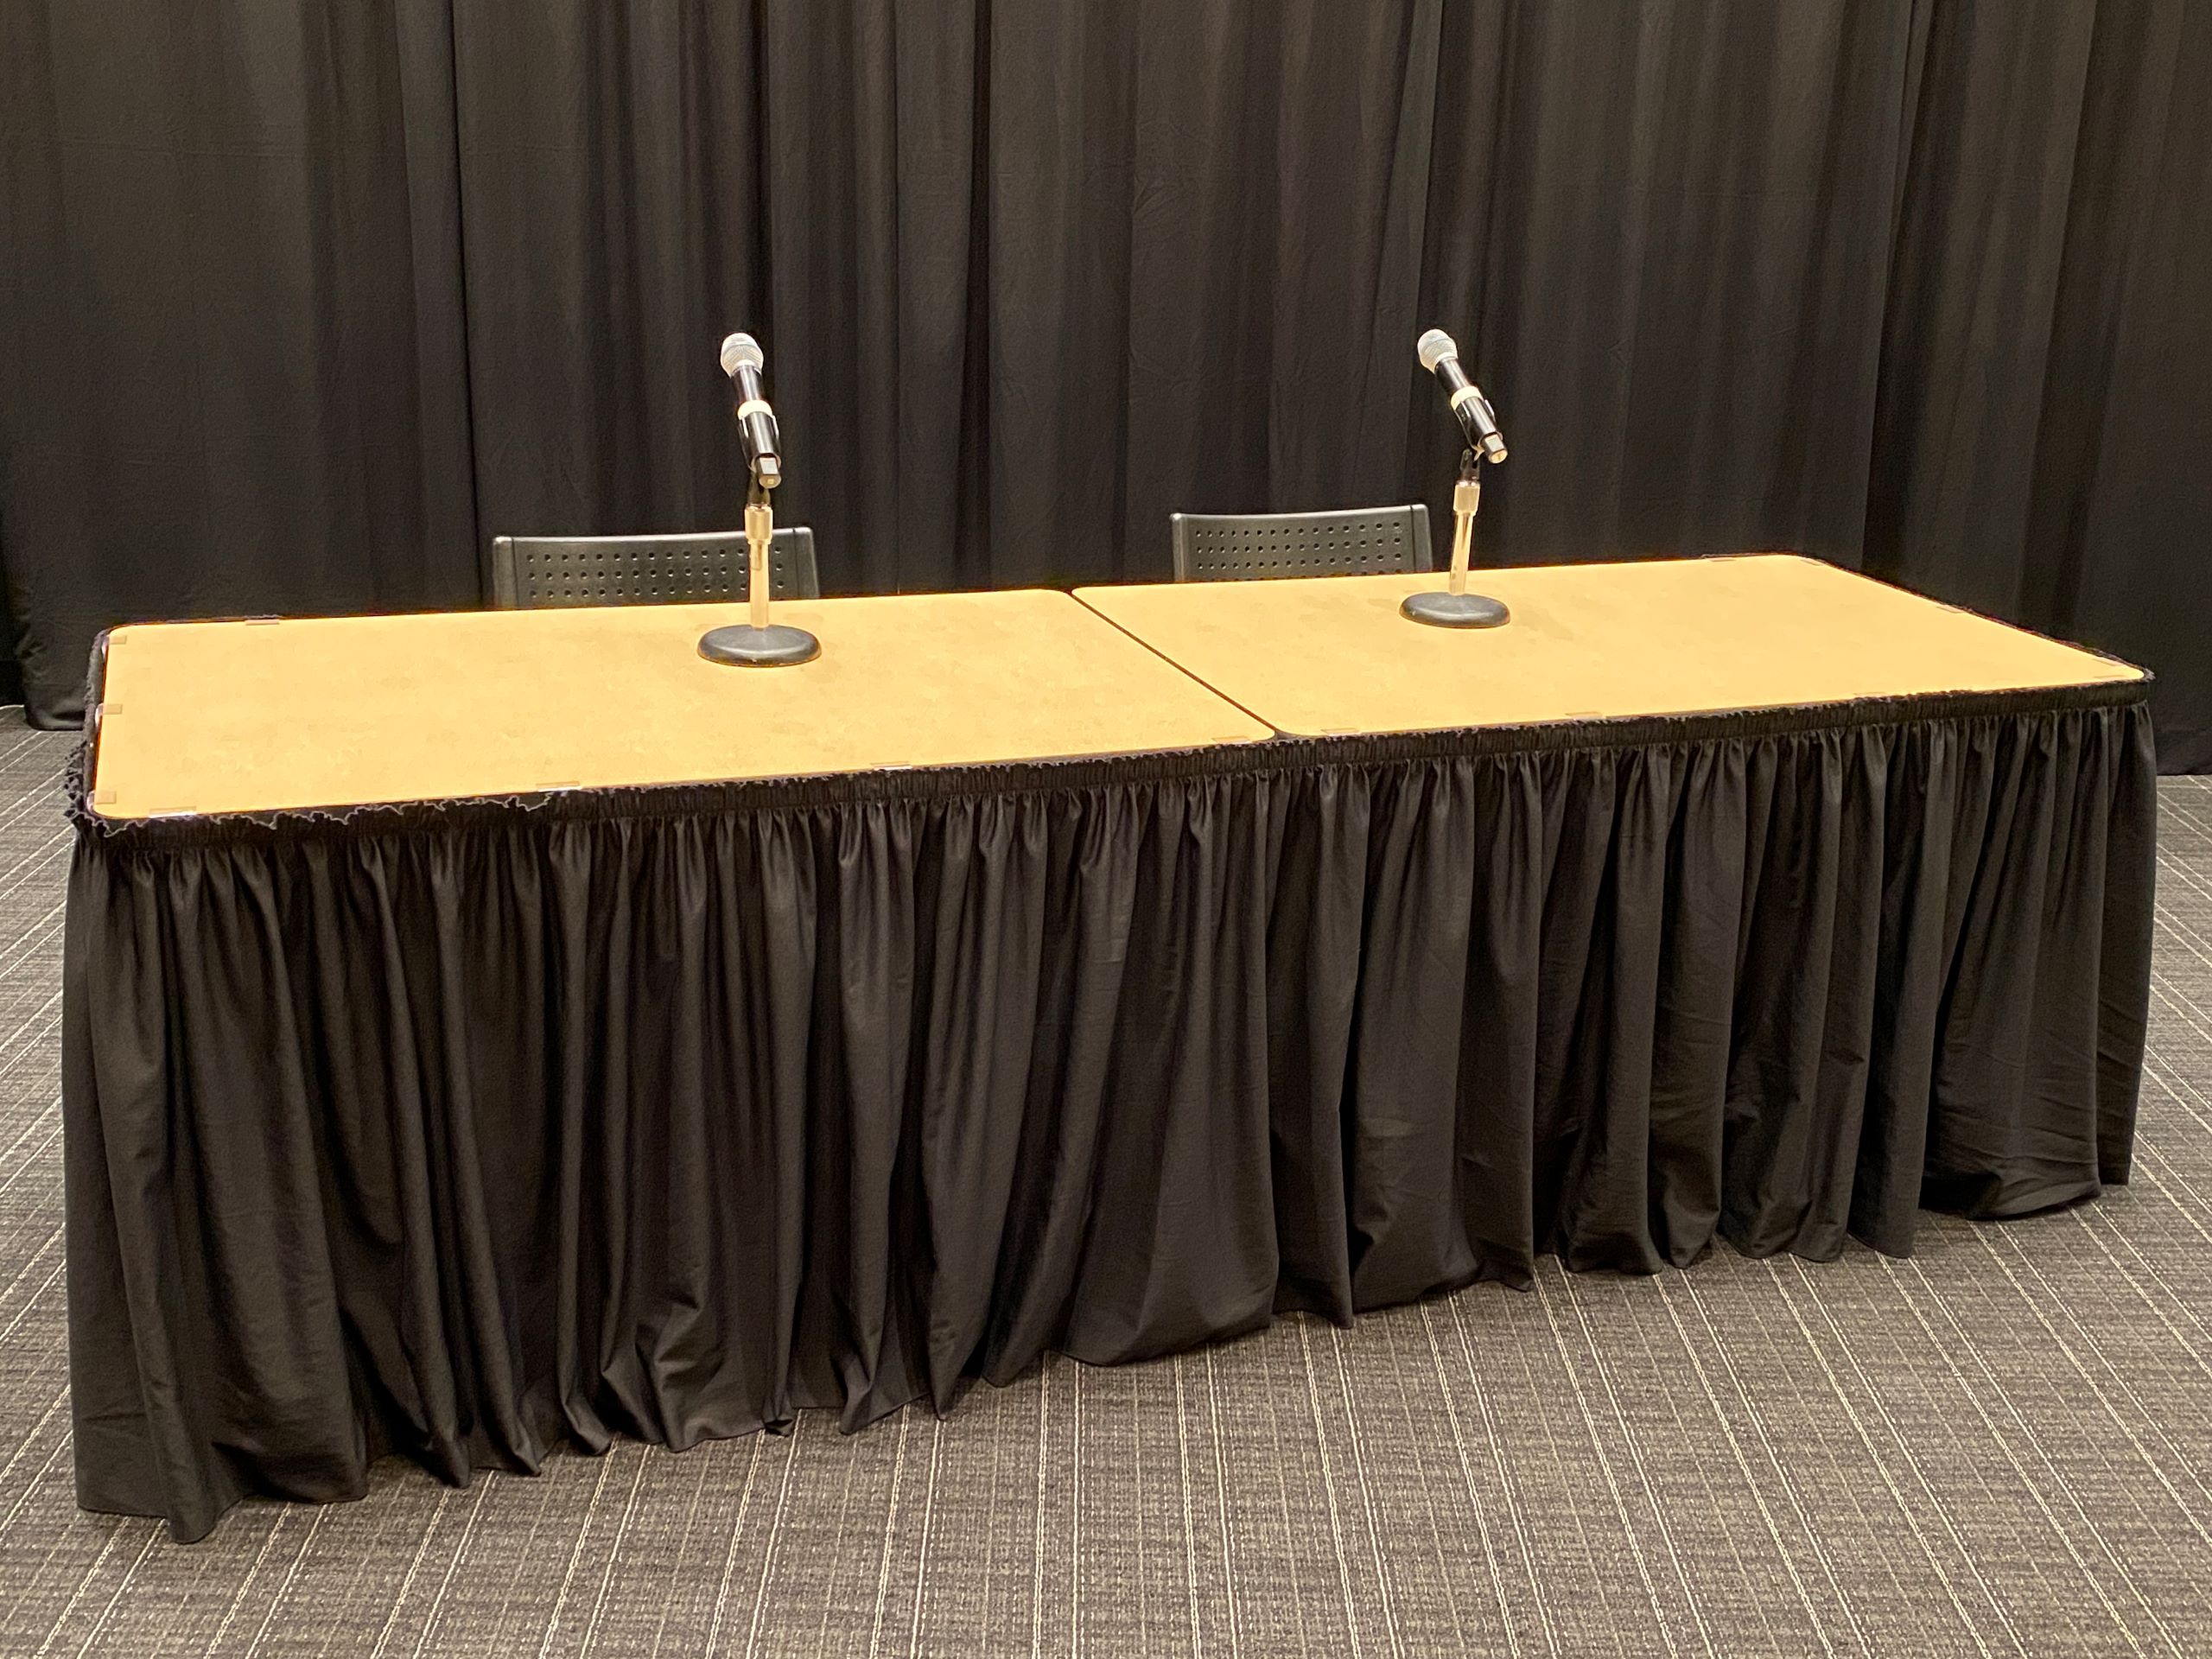 A wooden-top folding table with black table skirting around the edges and two microphones on mic stands to simulate a panel setup.